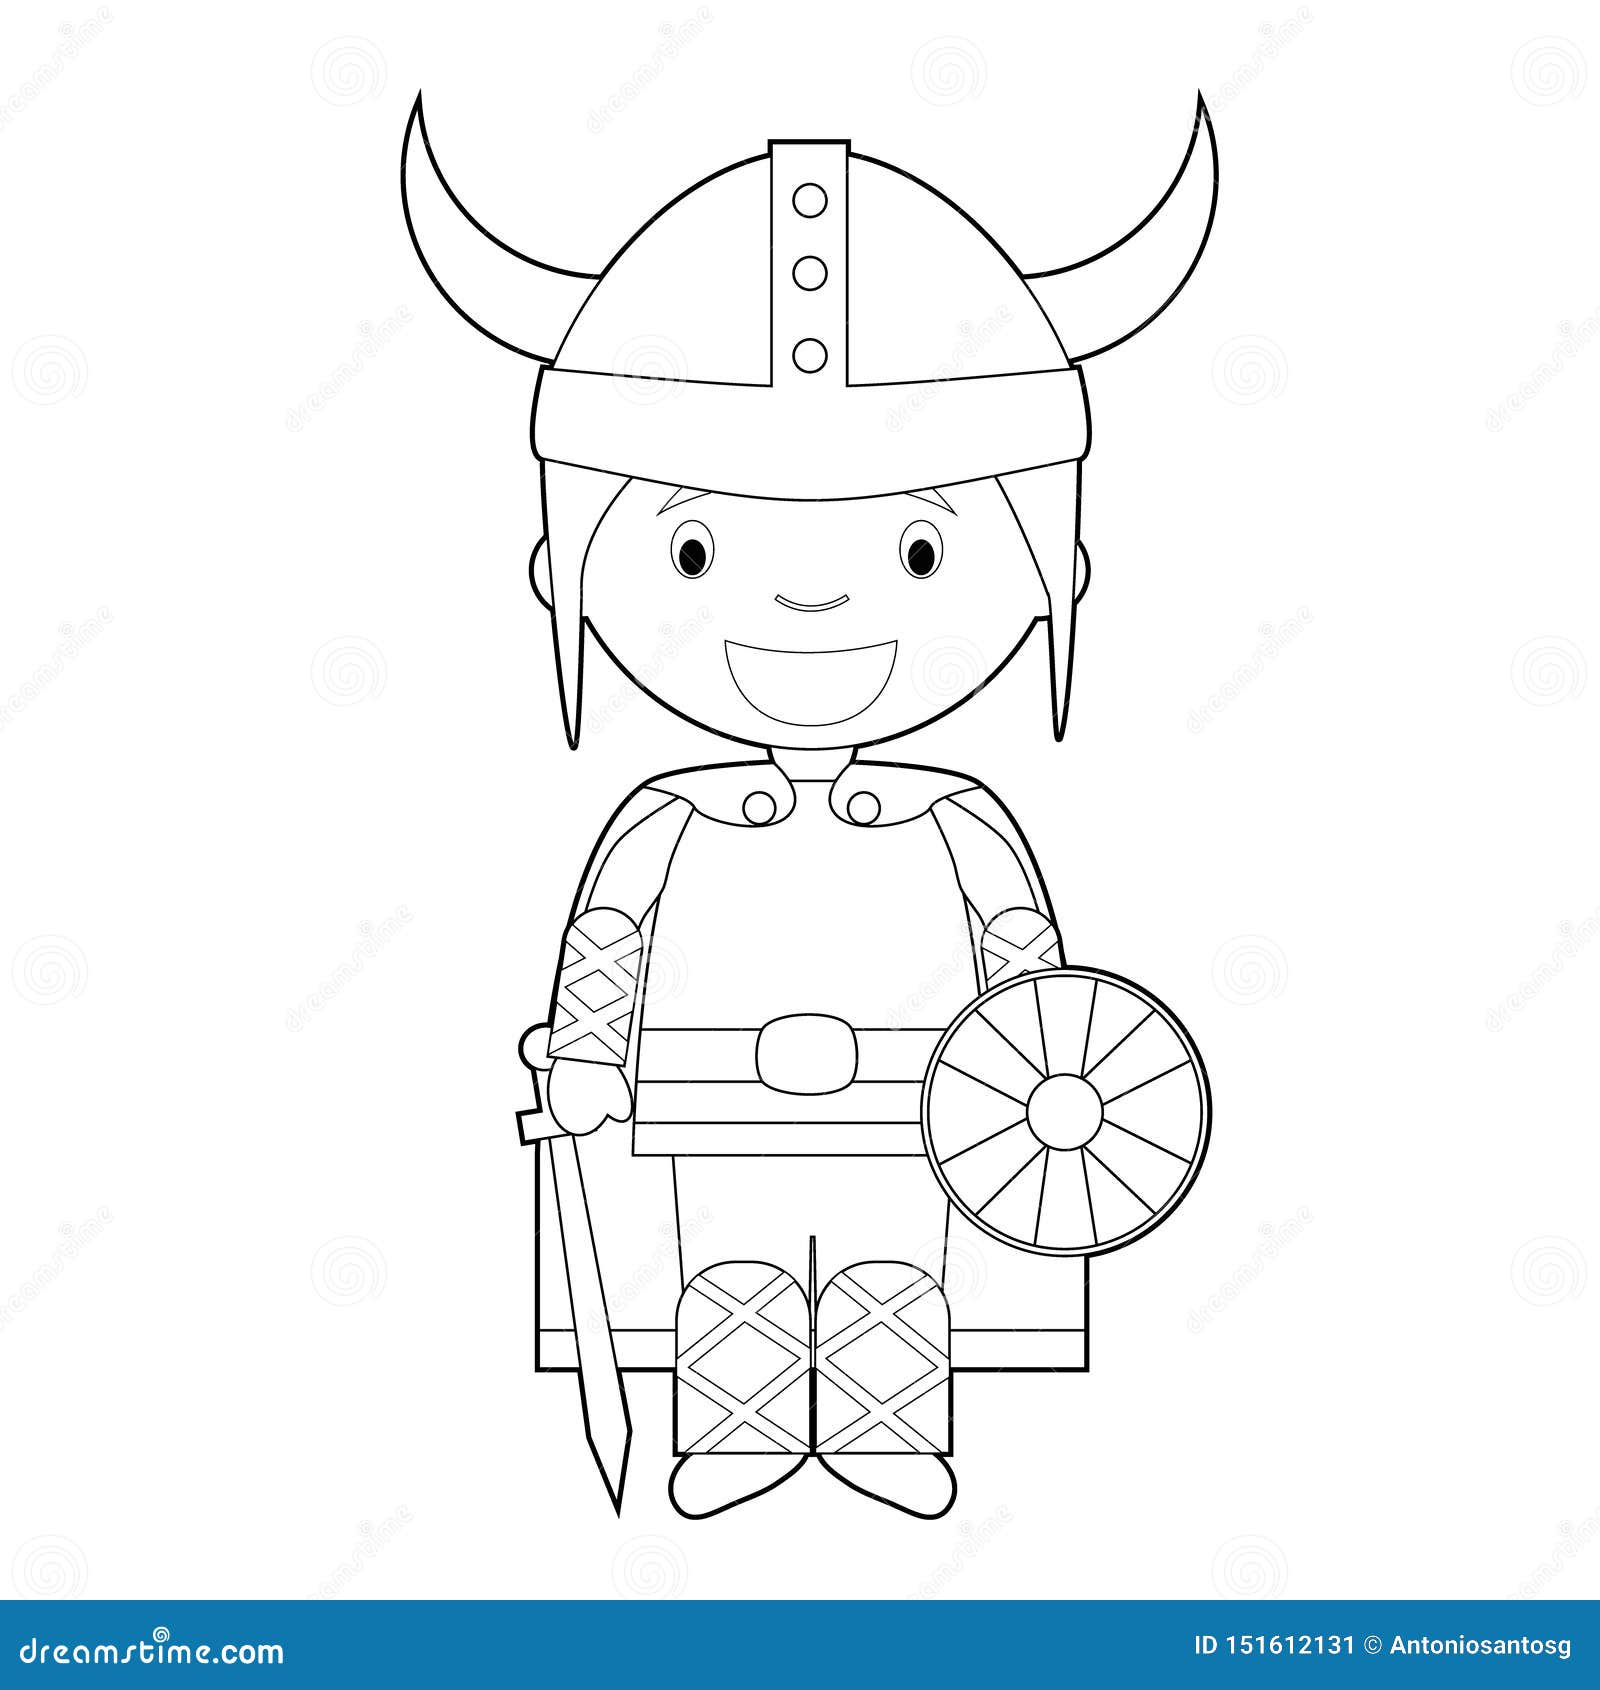 Easy Coloring Cartoon Character From Sweden, Norway Or Scandinavia